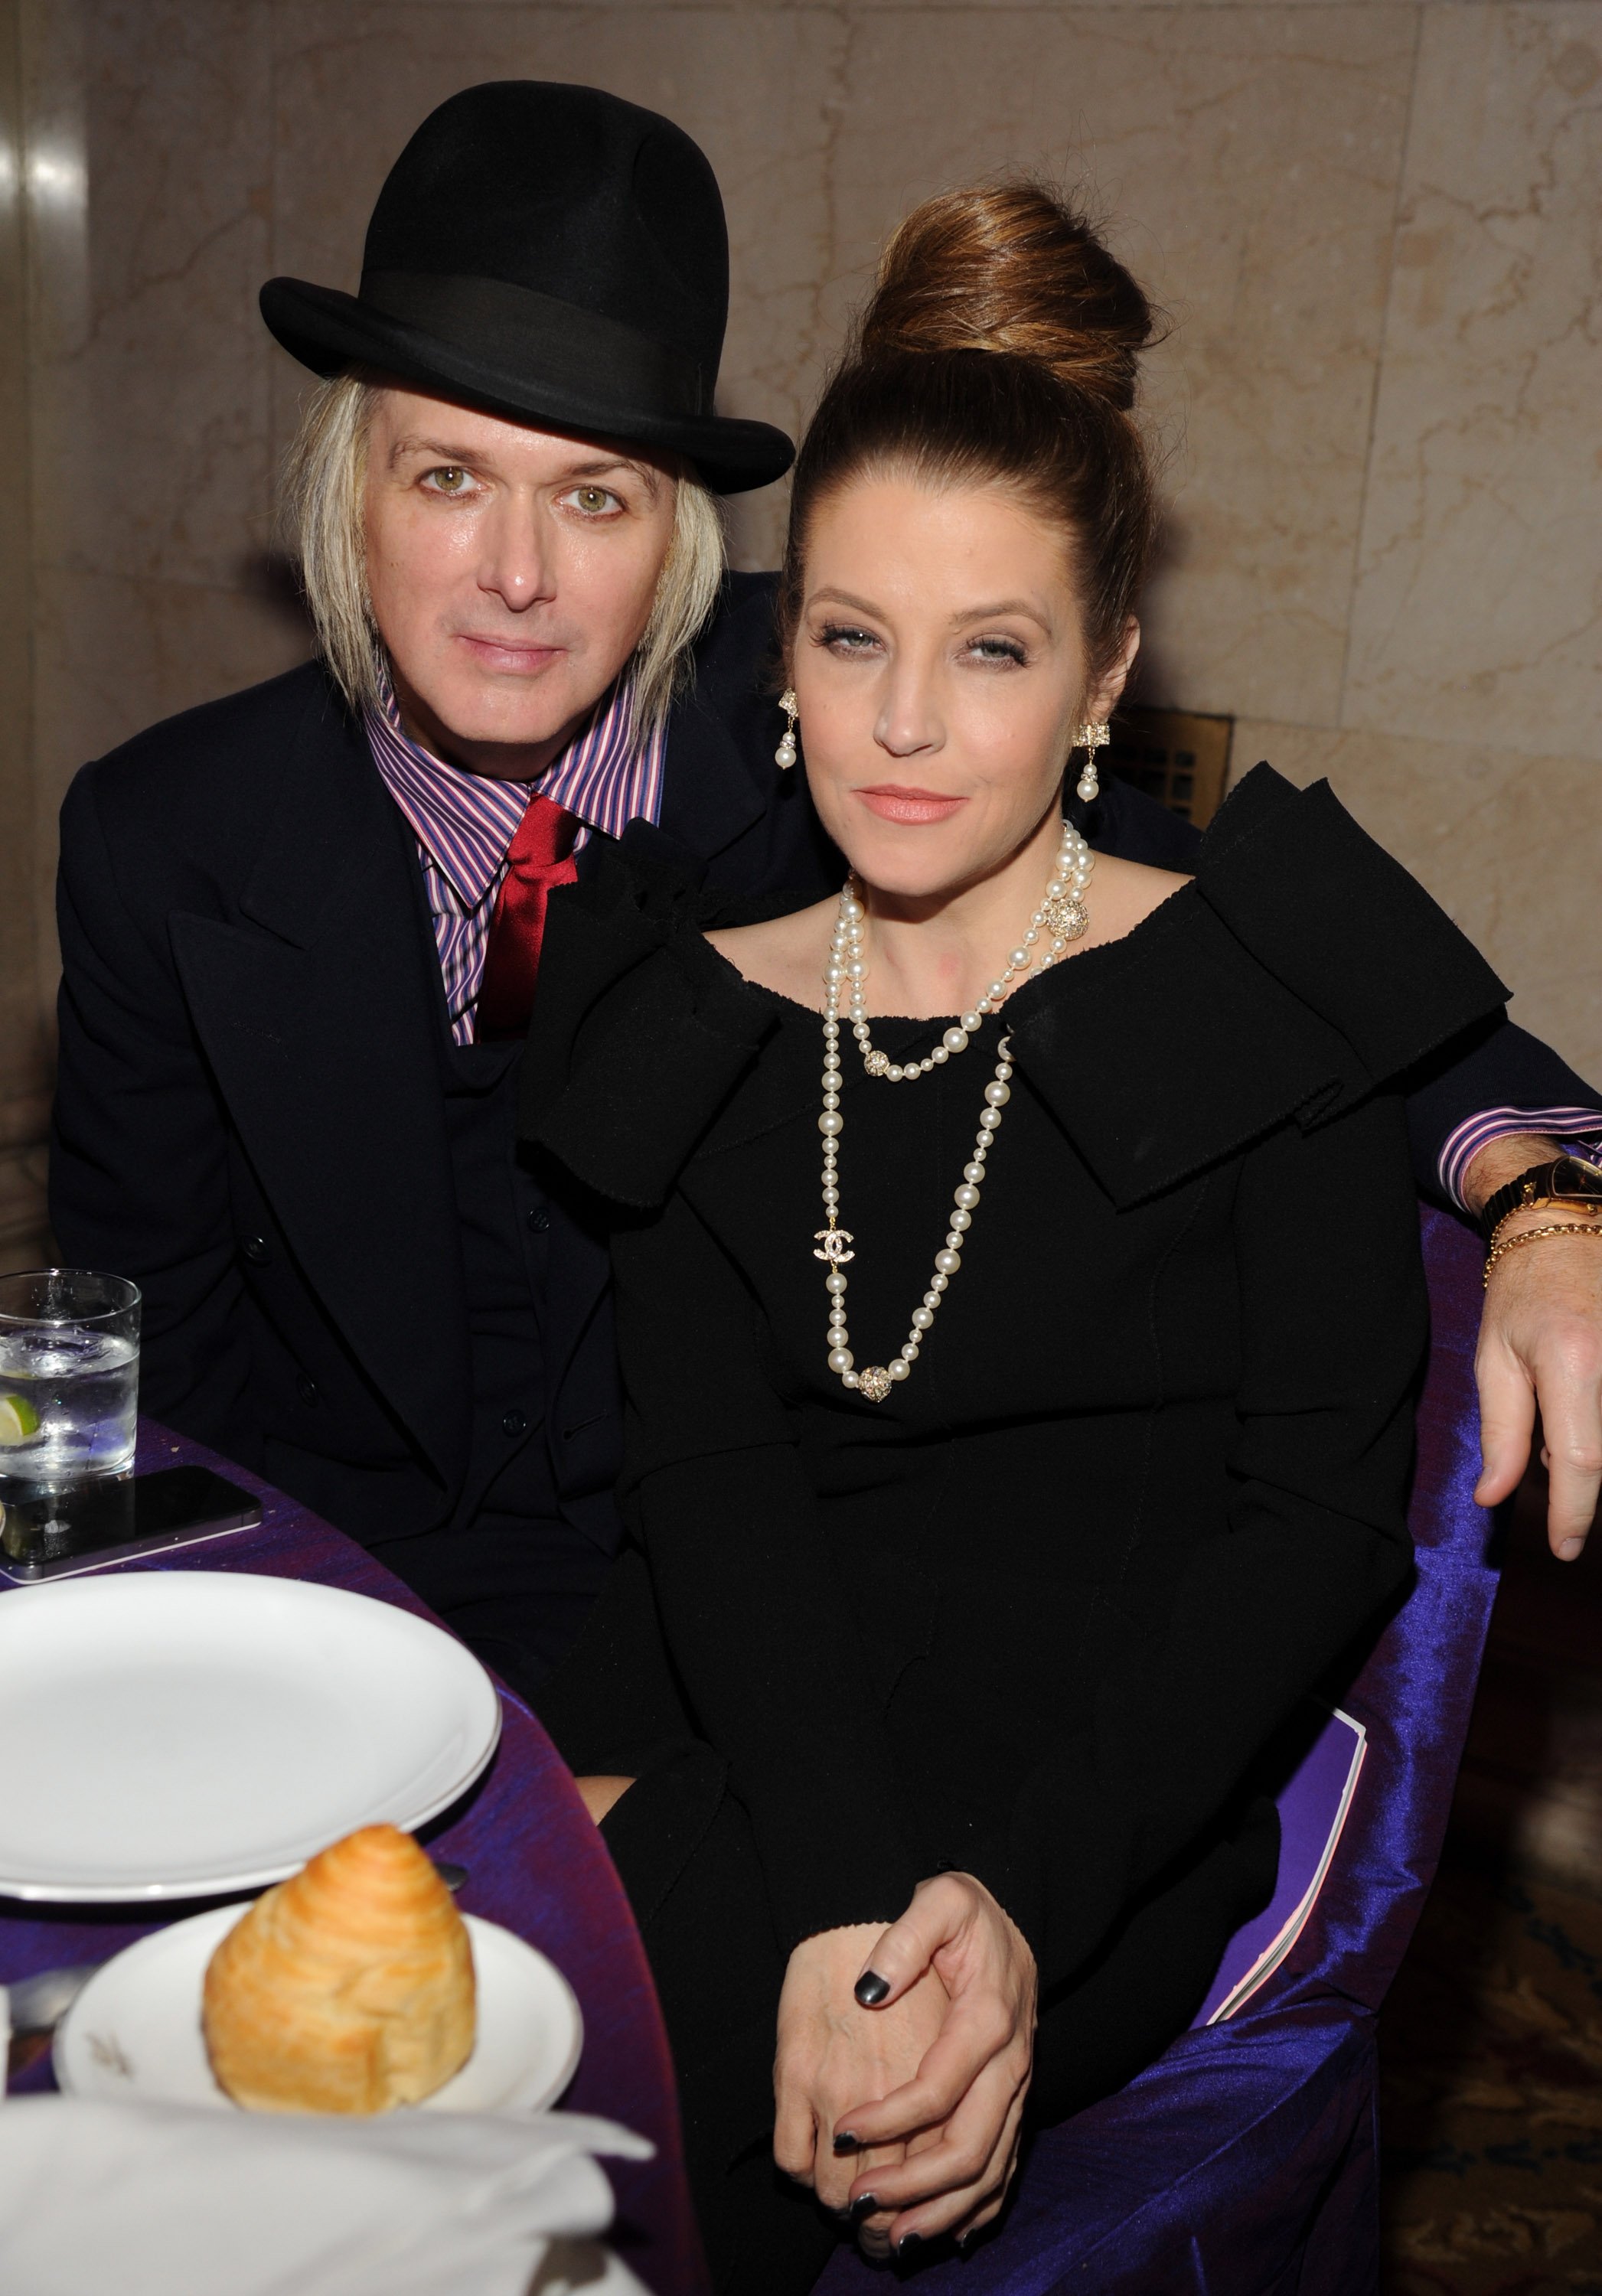 Michael Lockwood and Lisa Marie Presley at the Elton John AIDS Foundation's 12th Annual An Enduring Vision Benefit on October 15, 2013, in New York City | Source: Getty Images